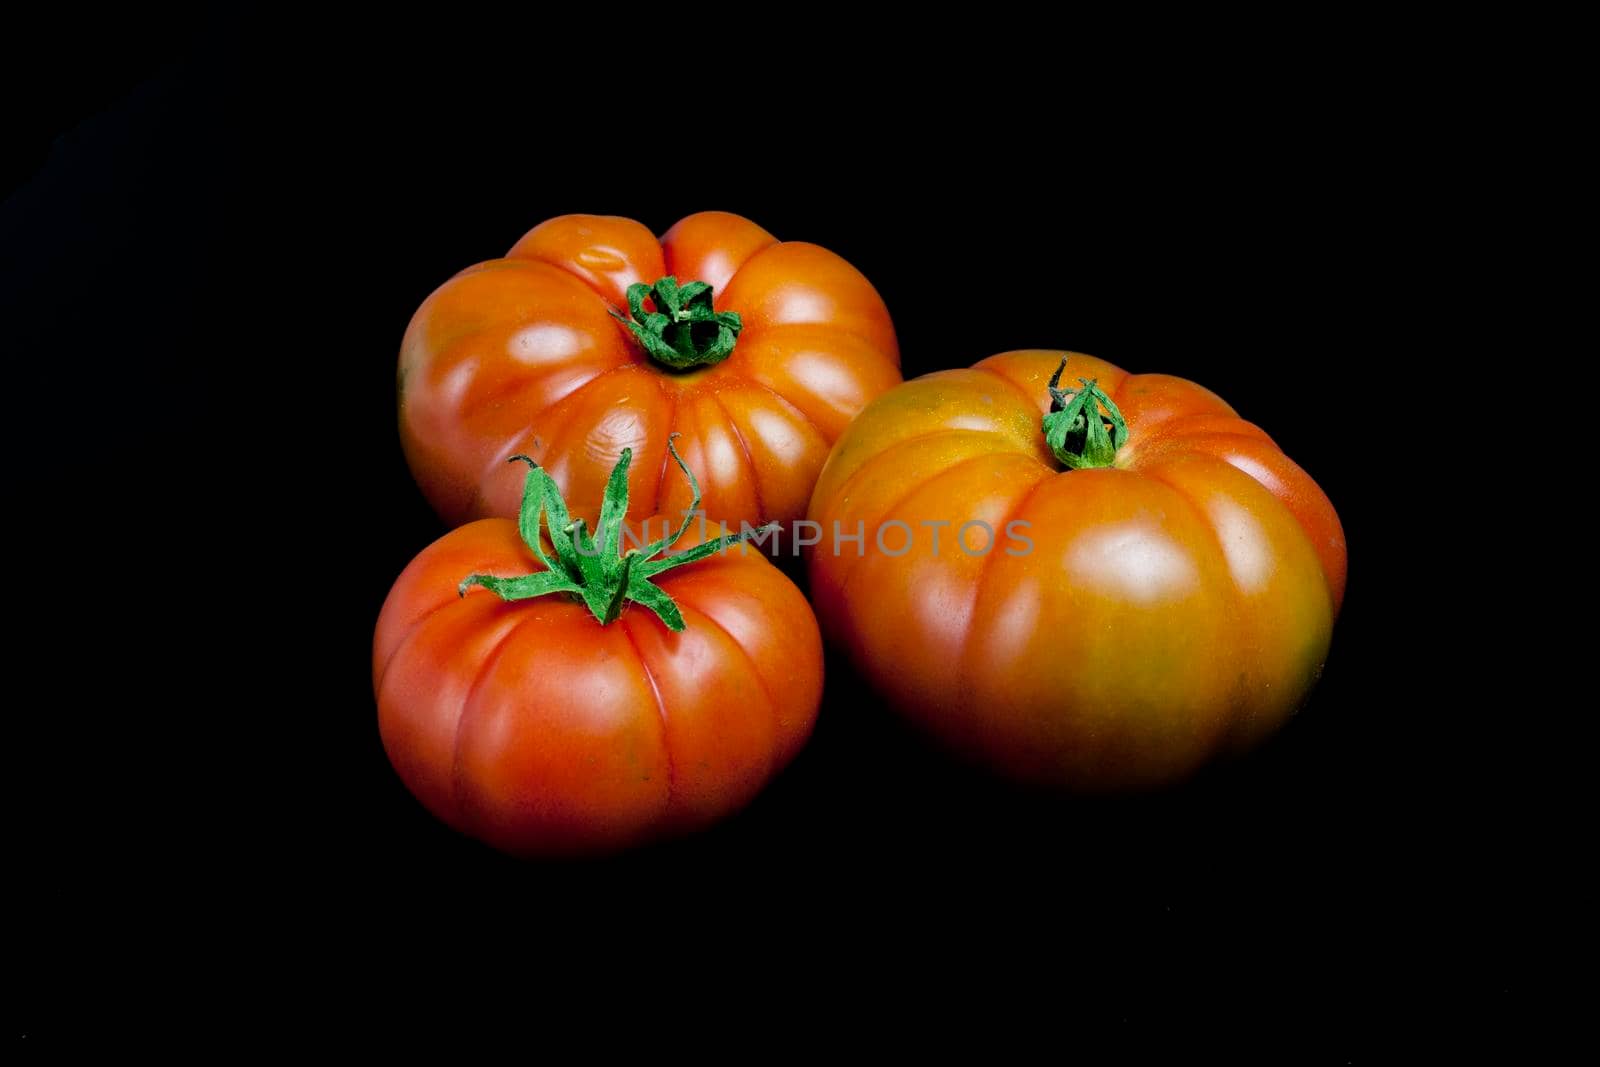 Three whole ripe tomatoes on a black background